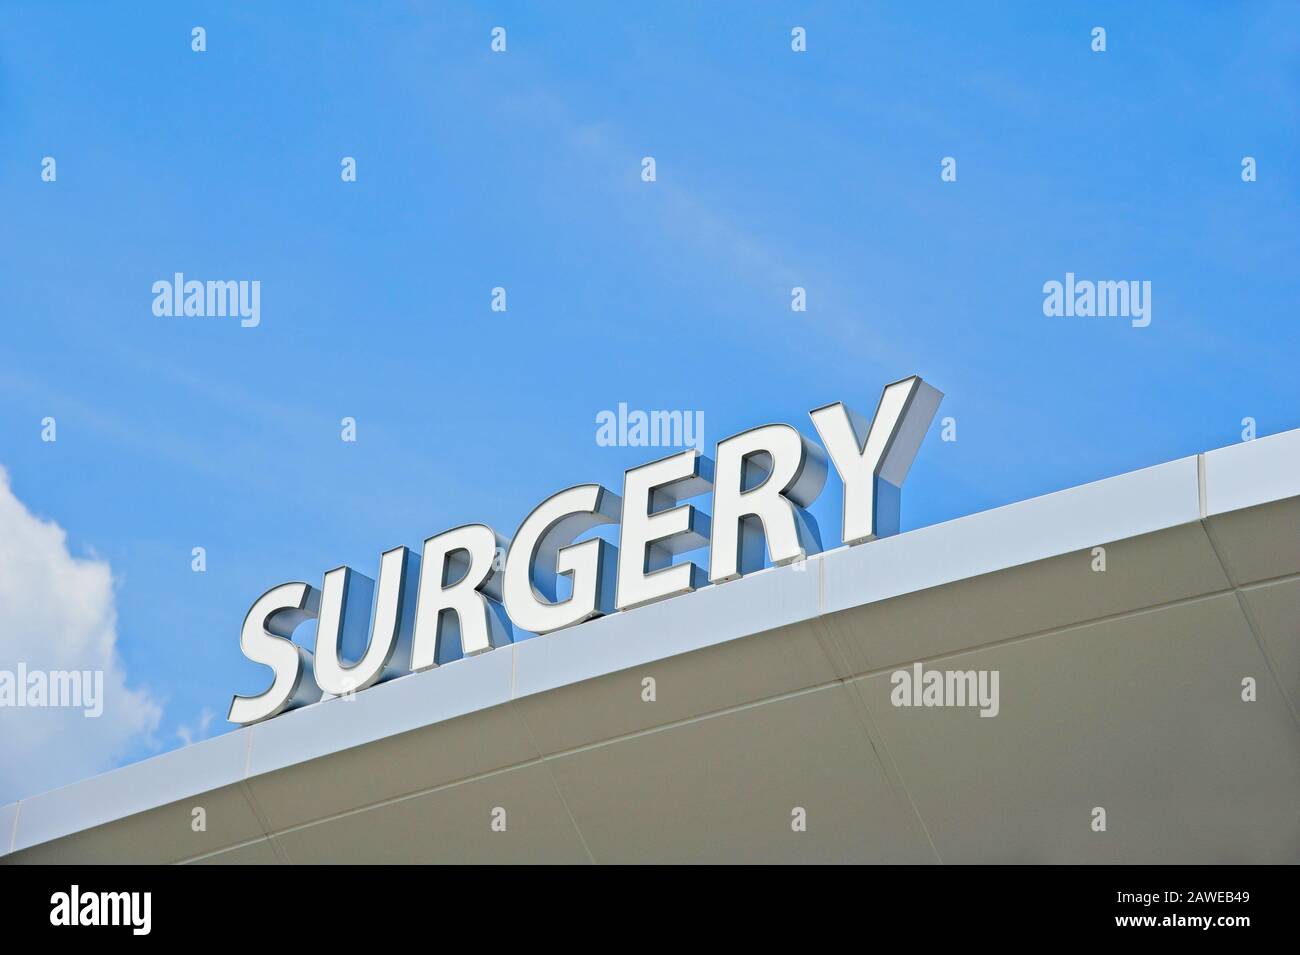 Hospital Outpatient Surgery Center Sign Stock Photo